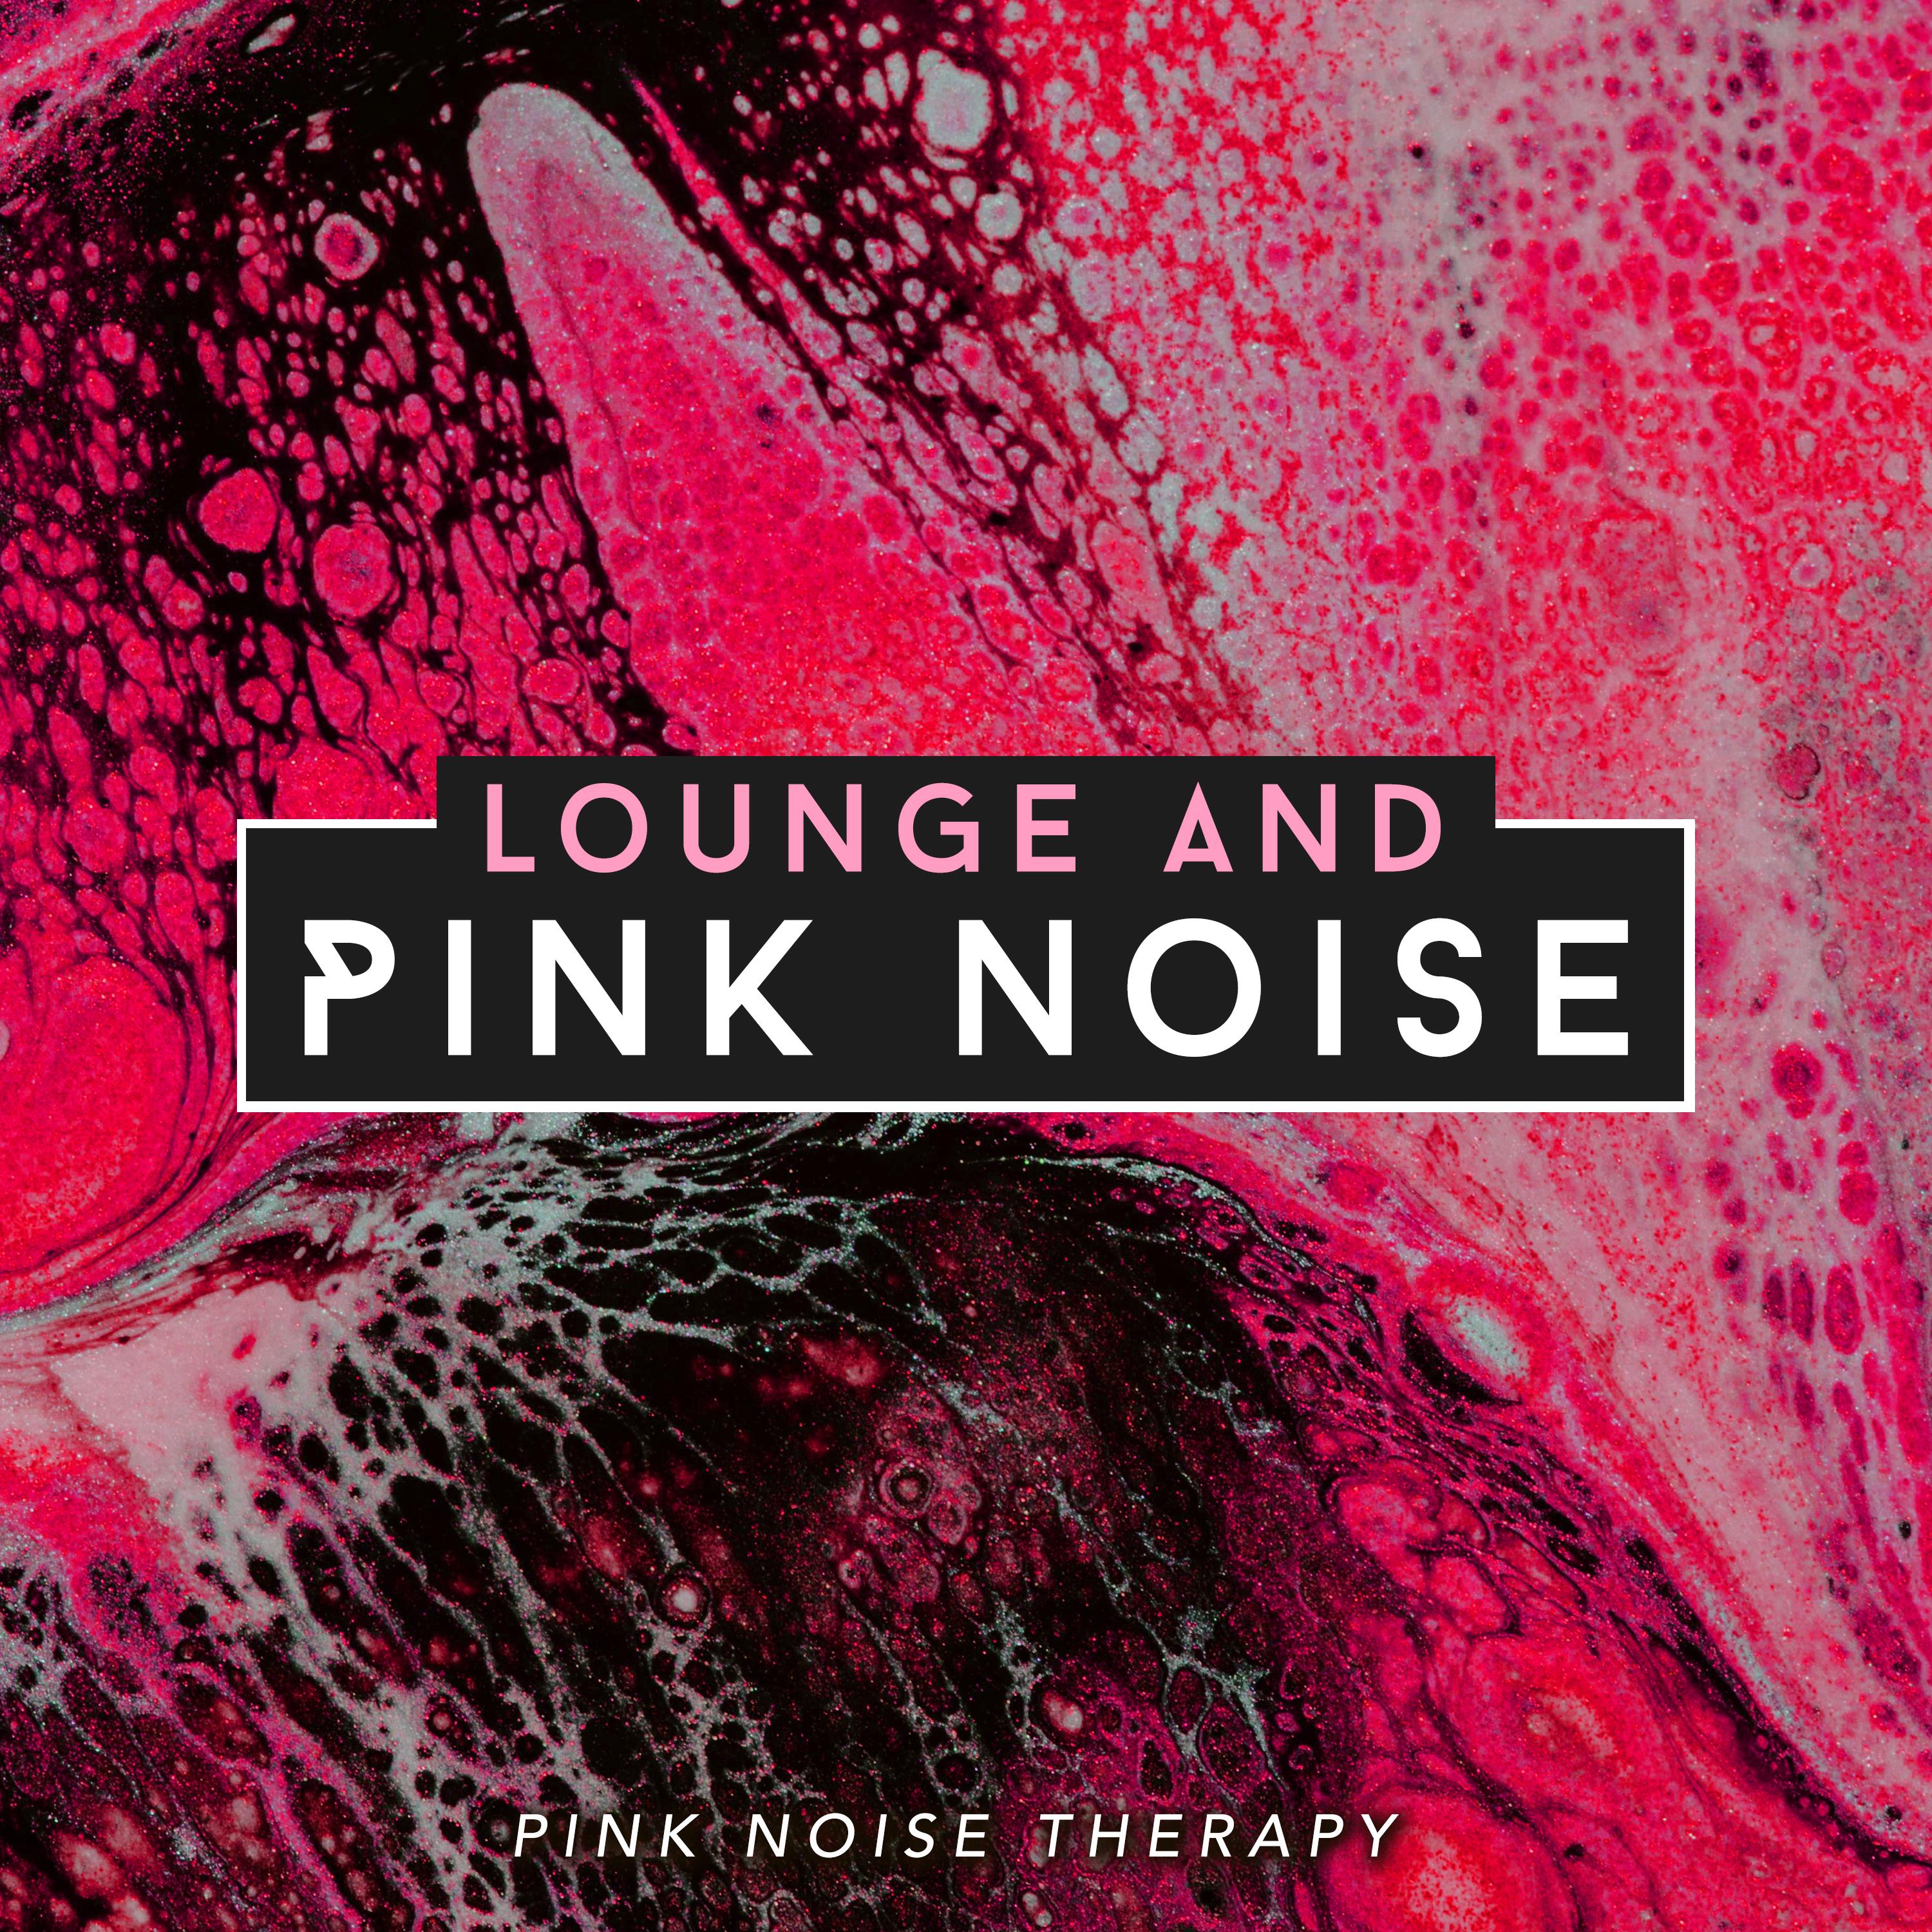 Lounge and Pink Noise